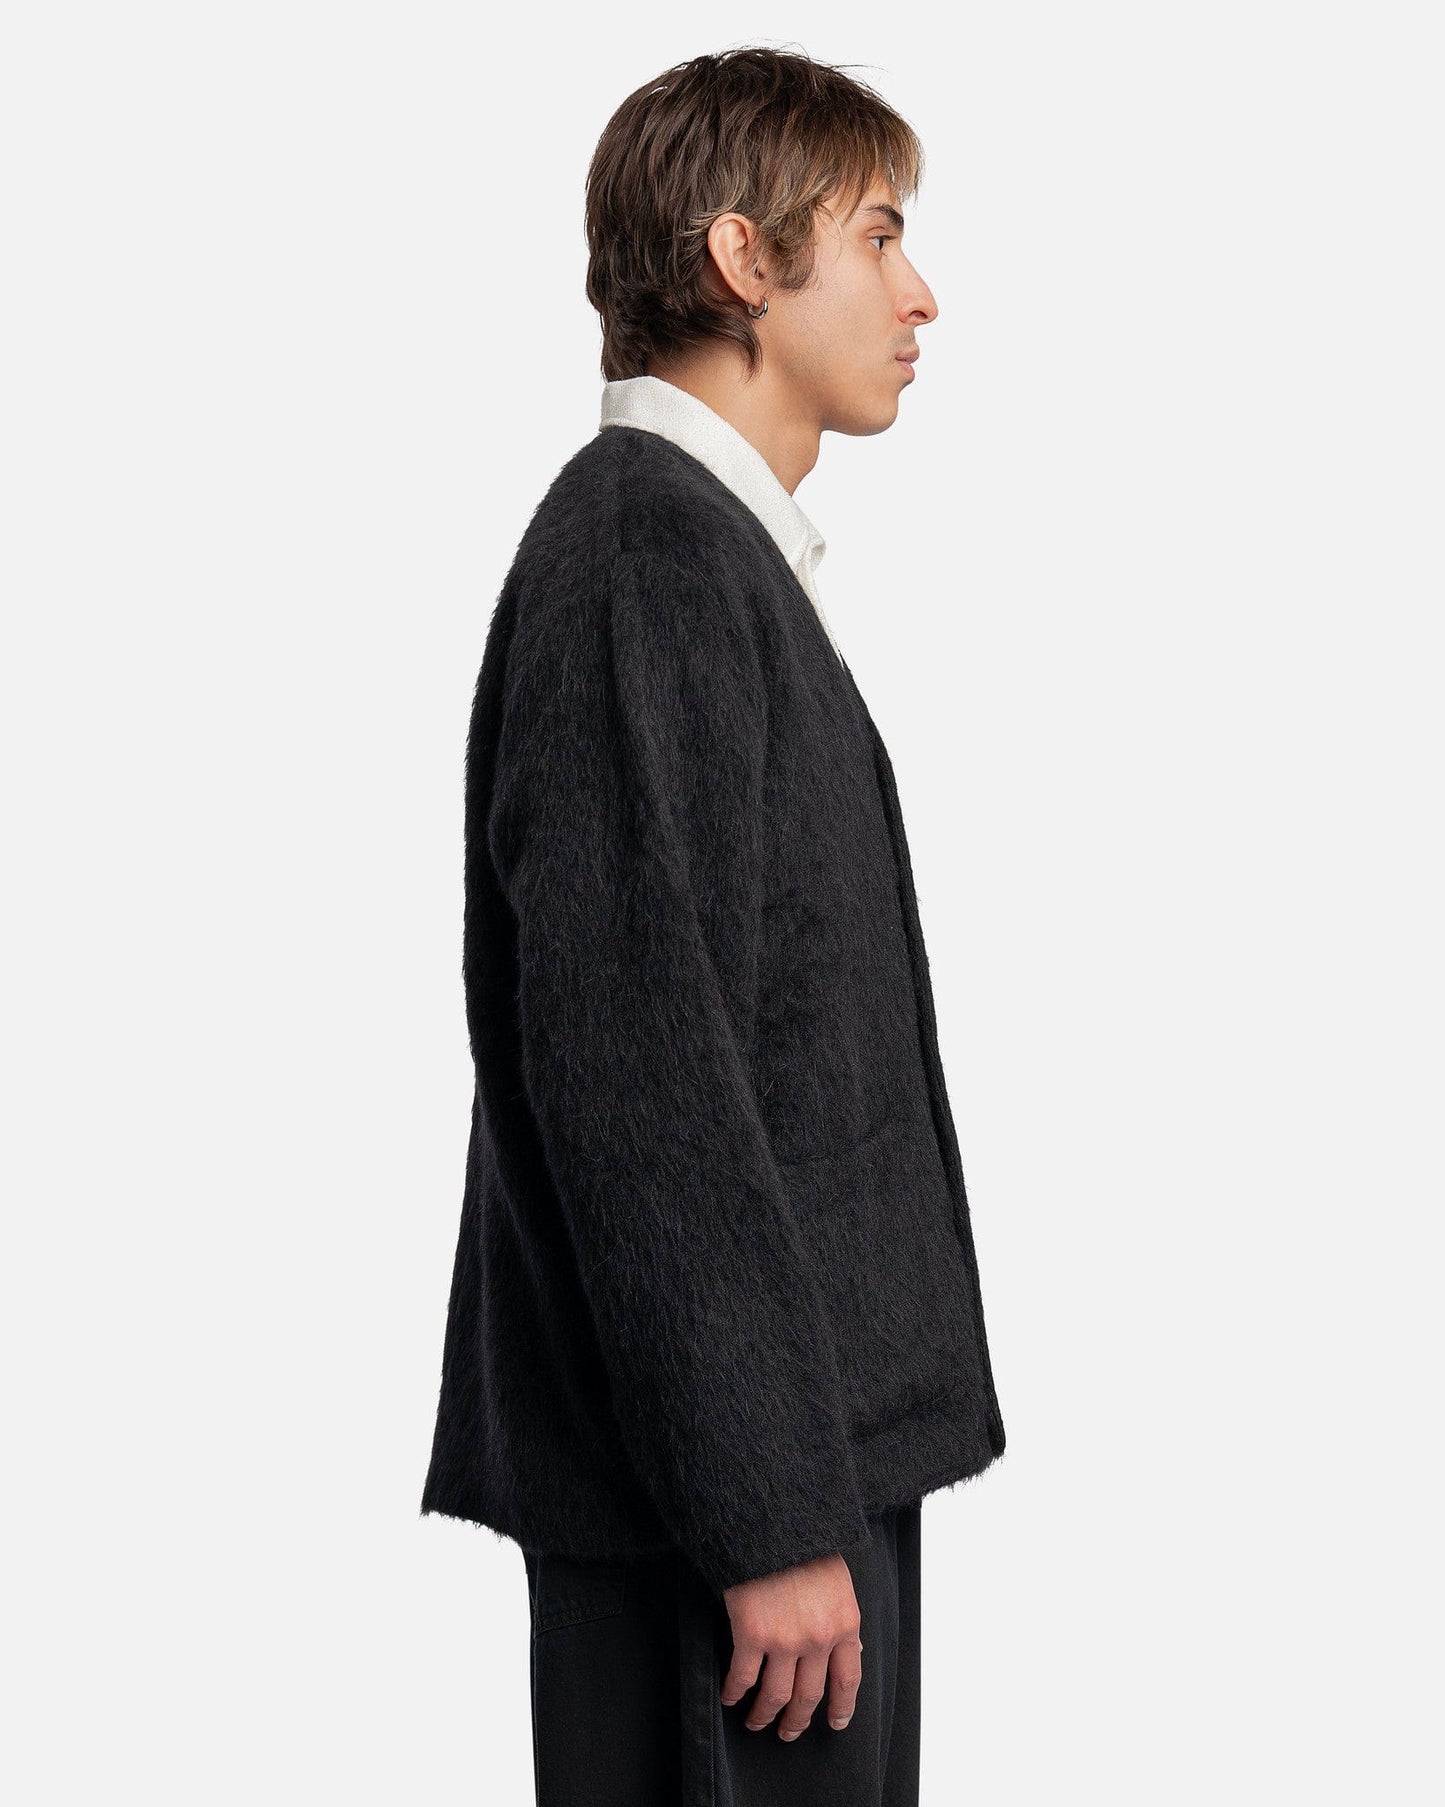 Our Legacy Men's Sweater Cardigan in Black Mohair